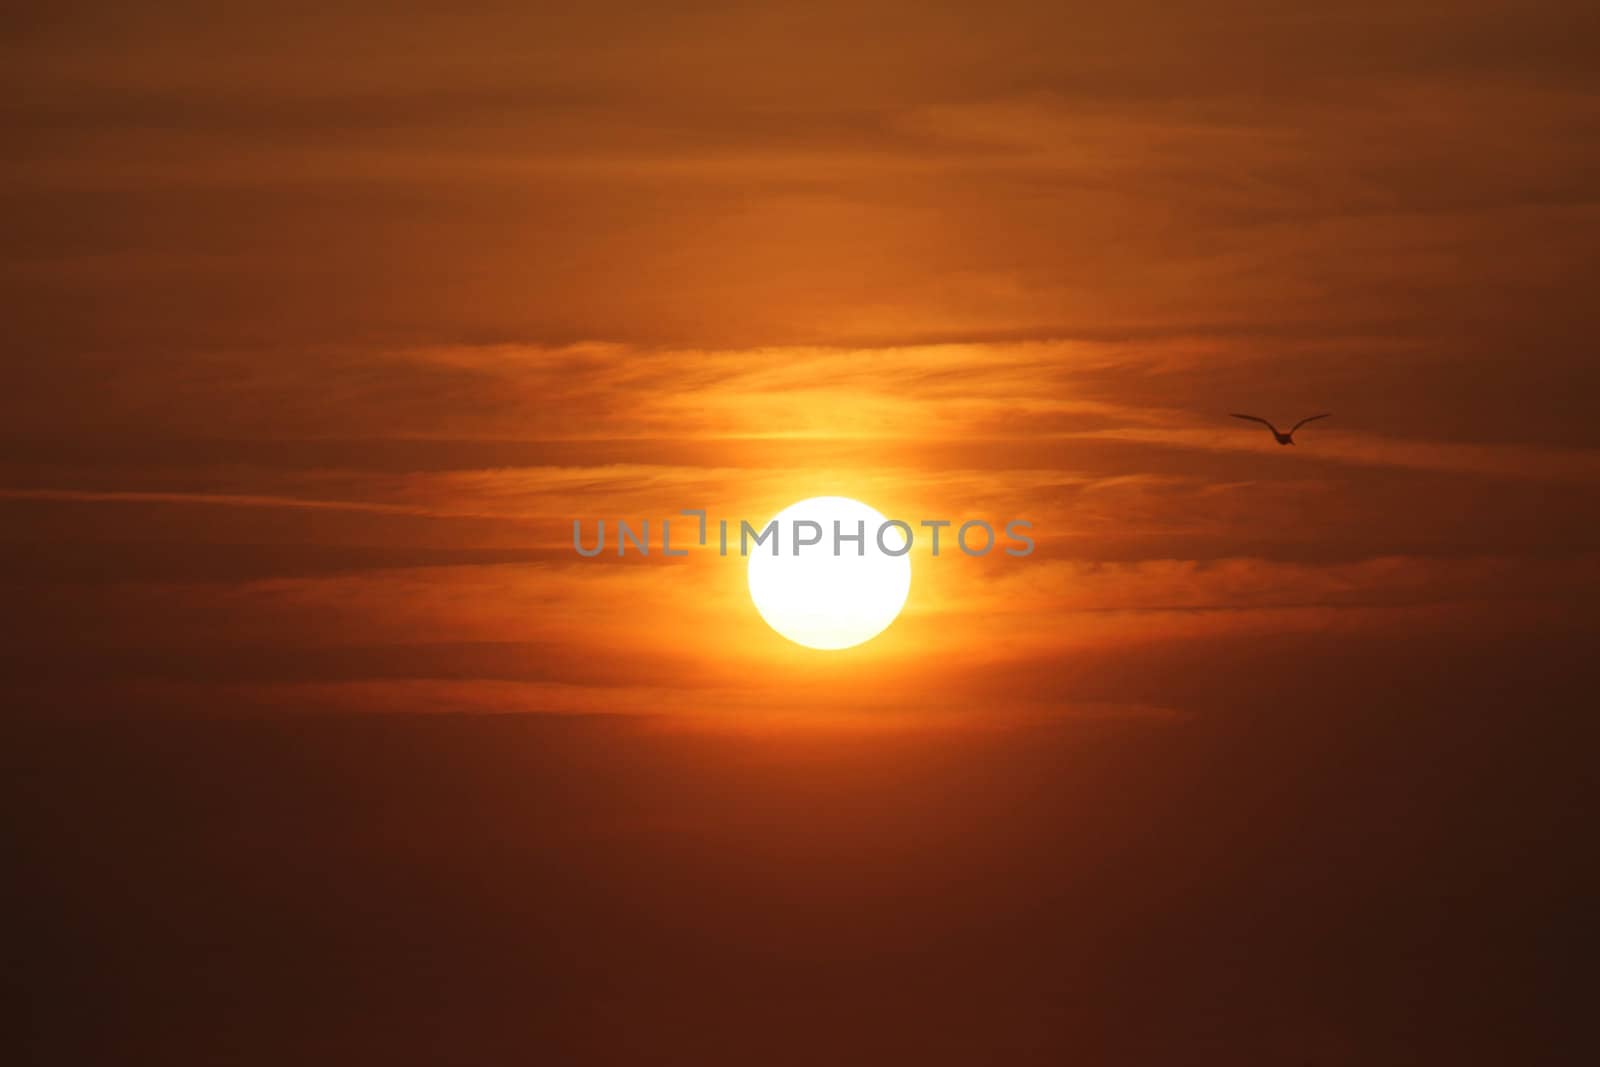 Seagulls flying around in the sunset by atlas